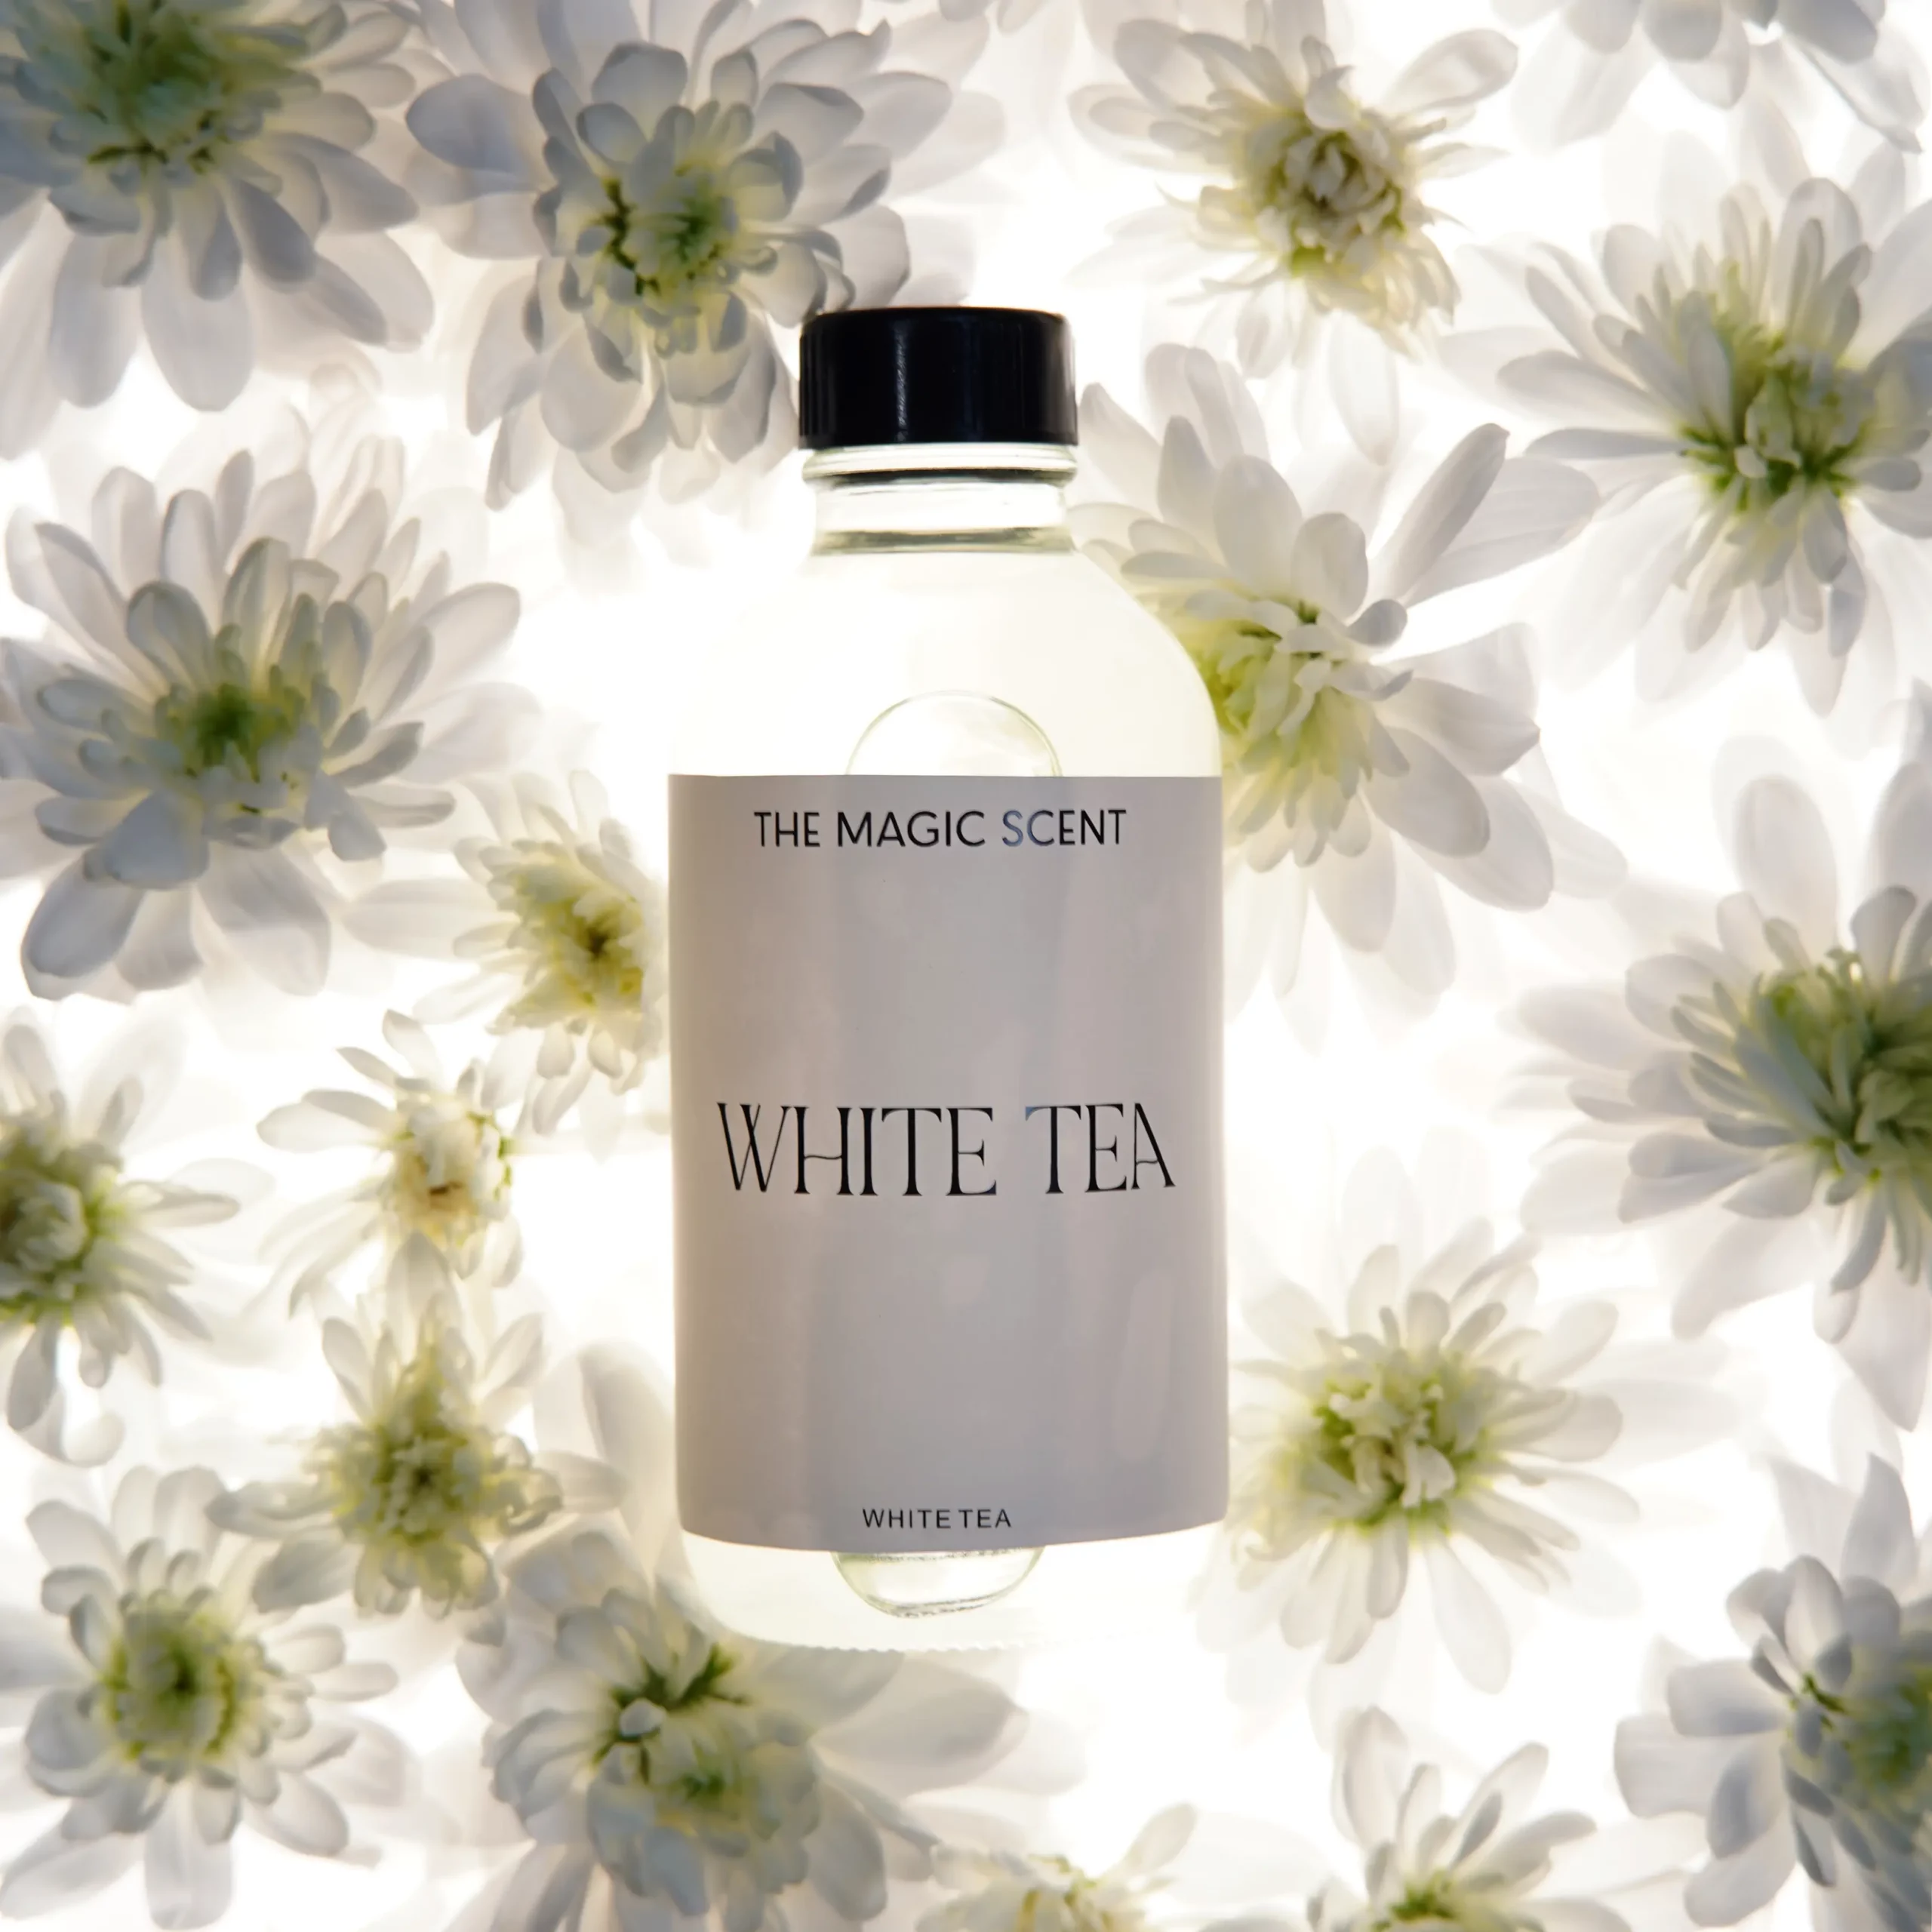 Scent Diffusers & Aroma Oils - Products - White Tea Aroma